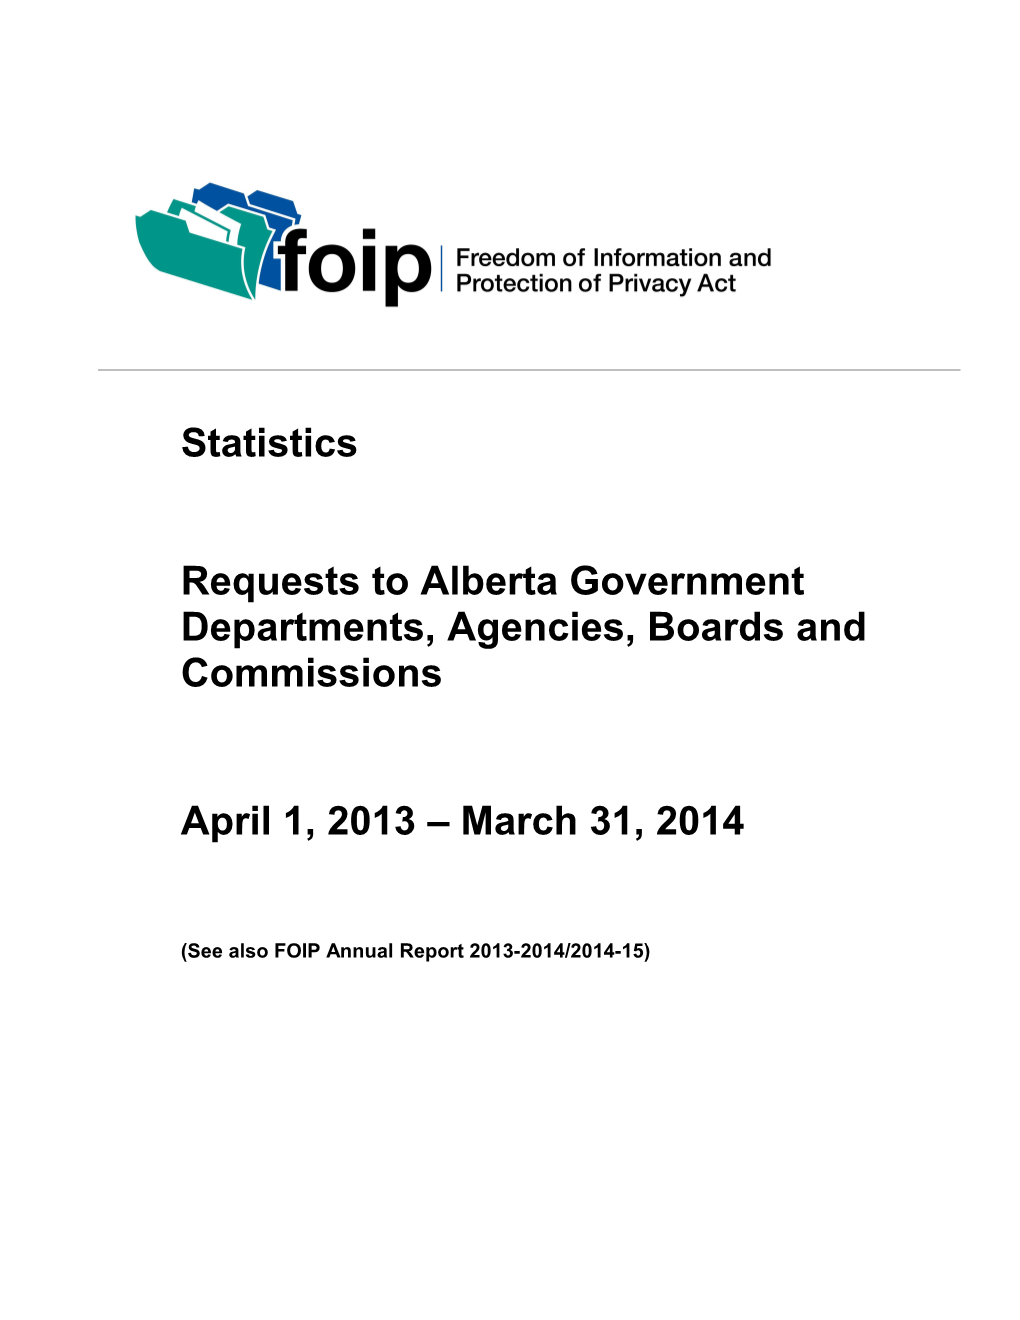 2010-2011 FOIP Statistics - Alberta Government Departments, Boards, Agencies and Commissions